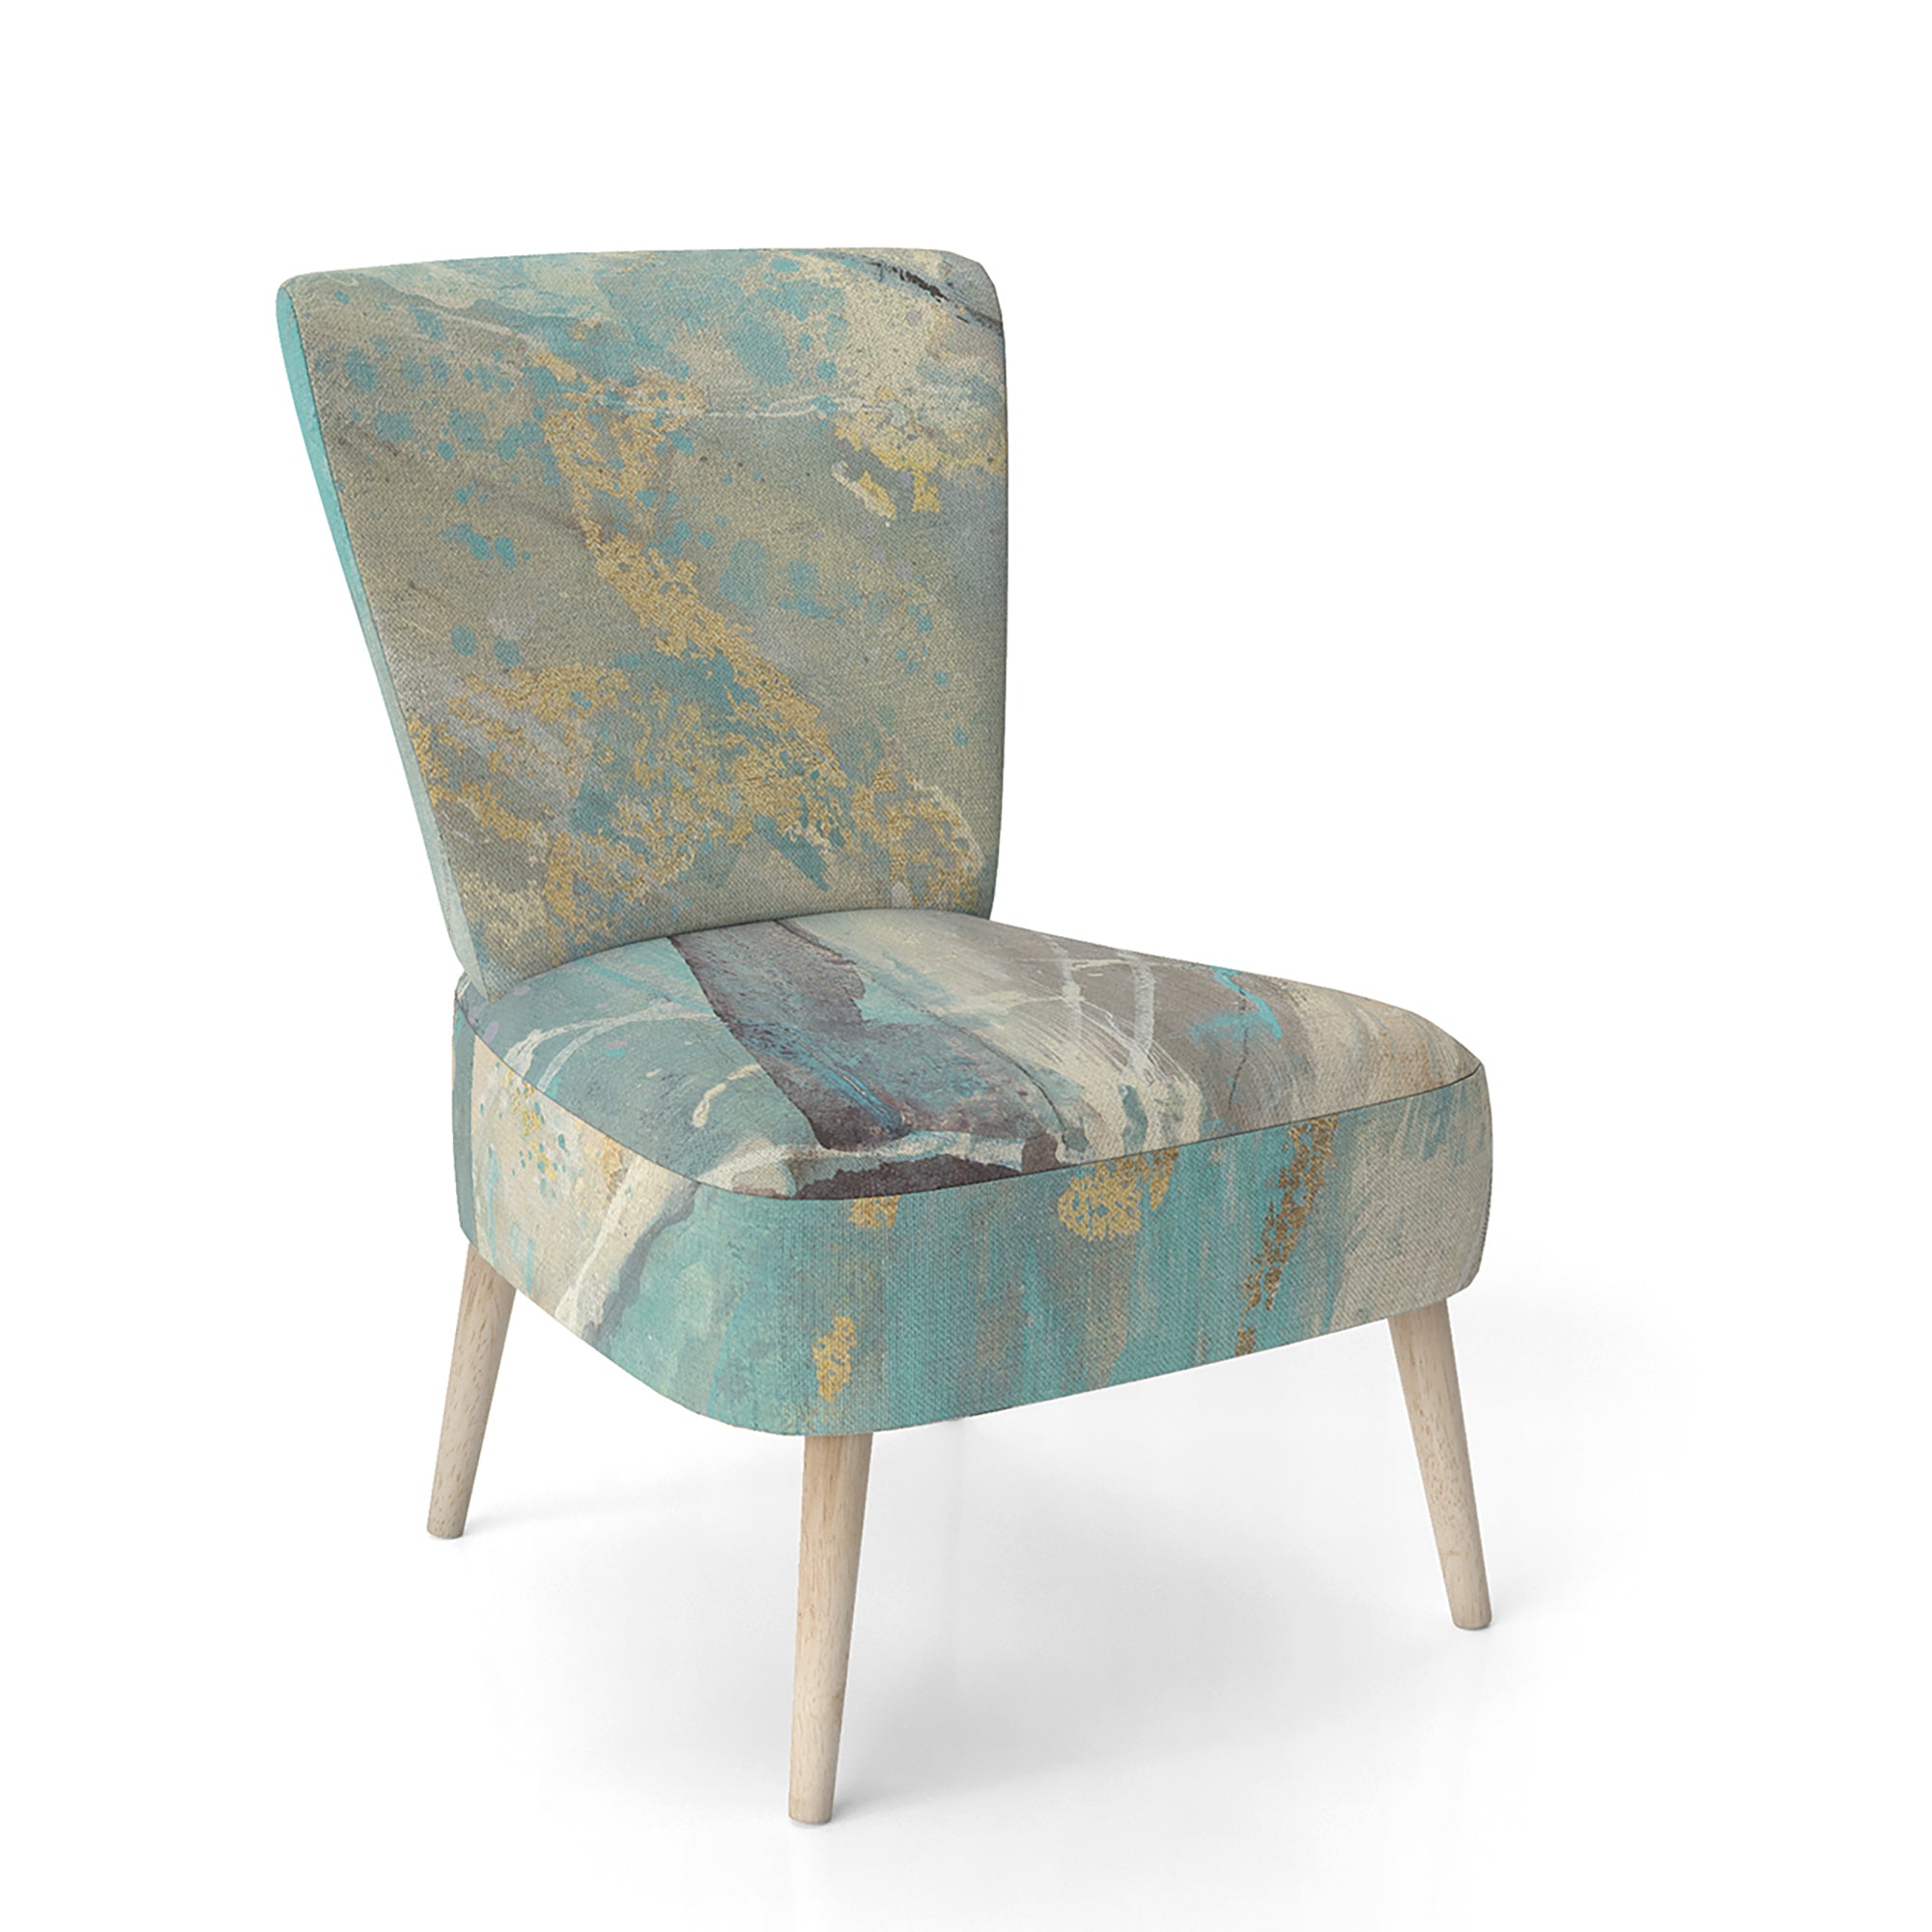 Mineral Landscape in Blue, Cream and Brown Nautical & Coastal Accent Chair